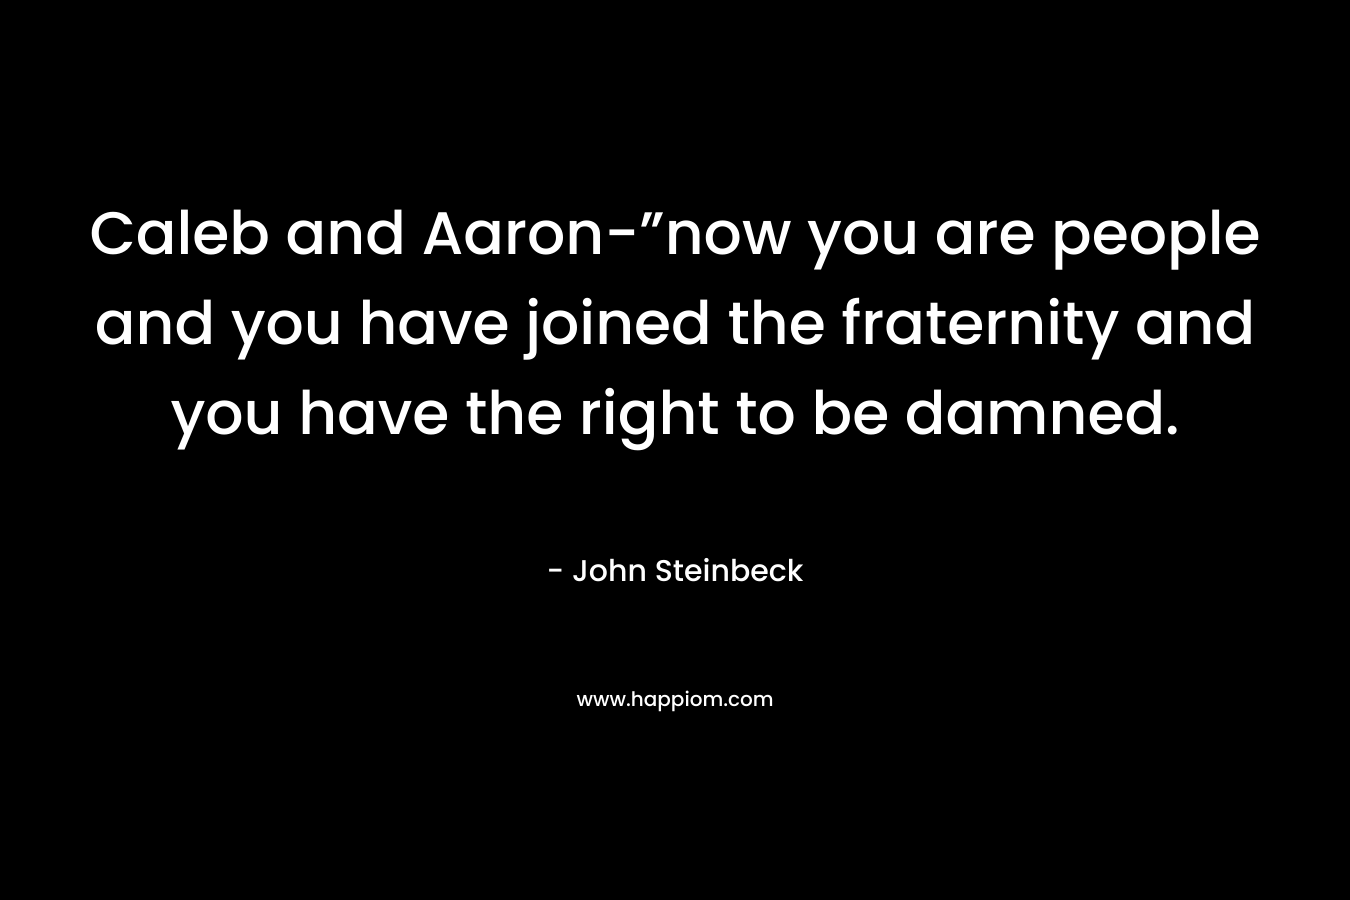 Caleb and Aaron-”now you are people and you have joined the fraternity and you have the right to be damned. – John Steinbeck